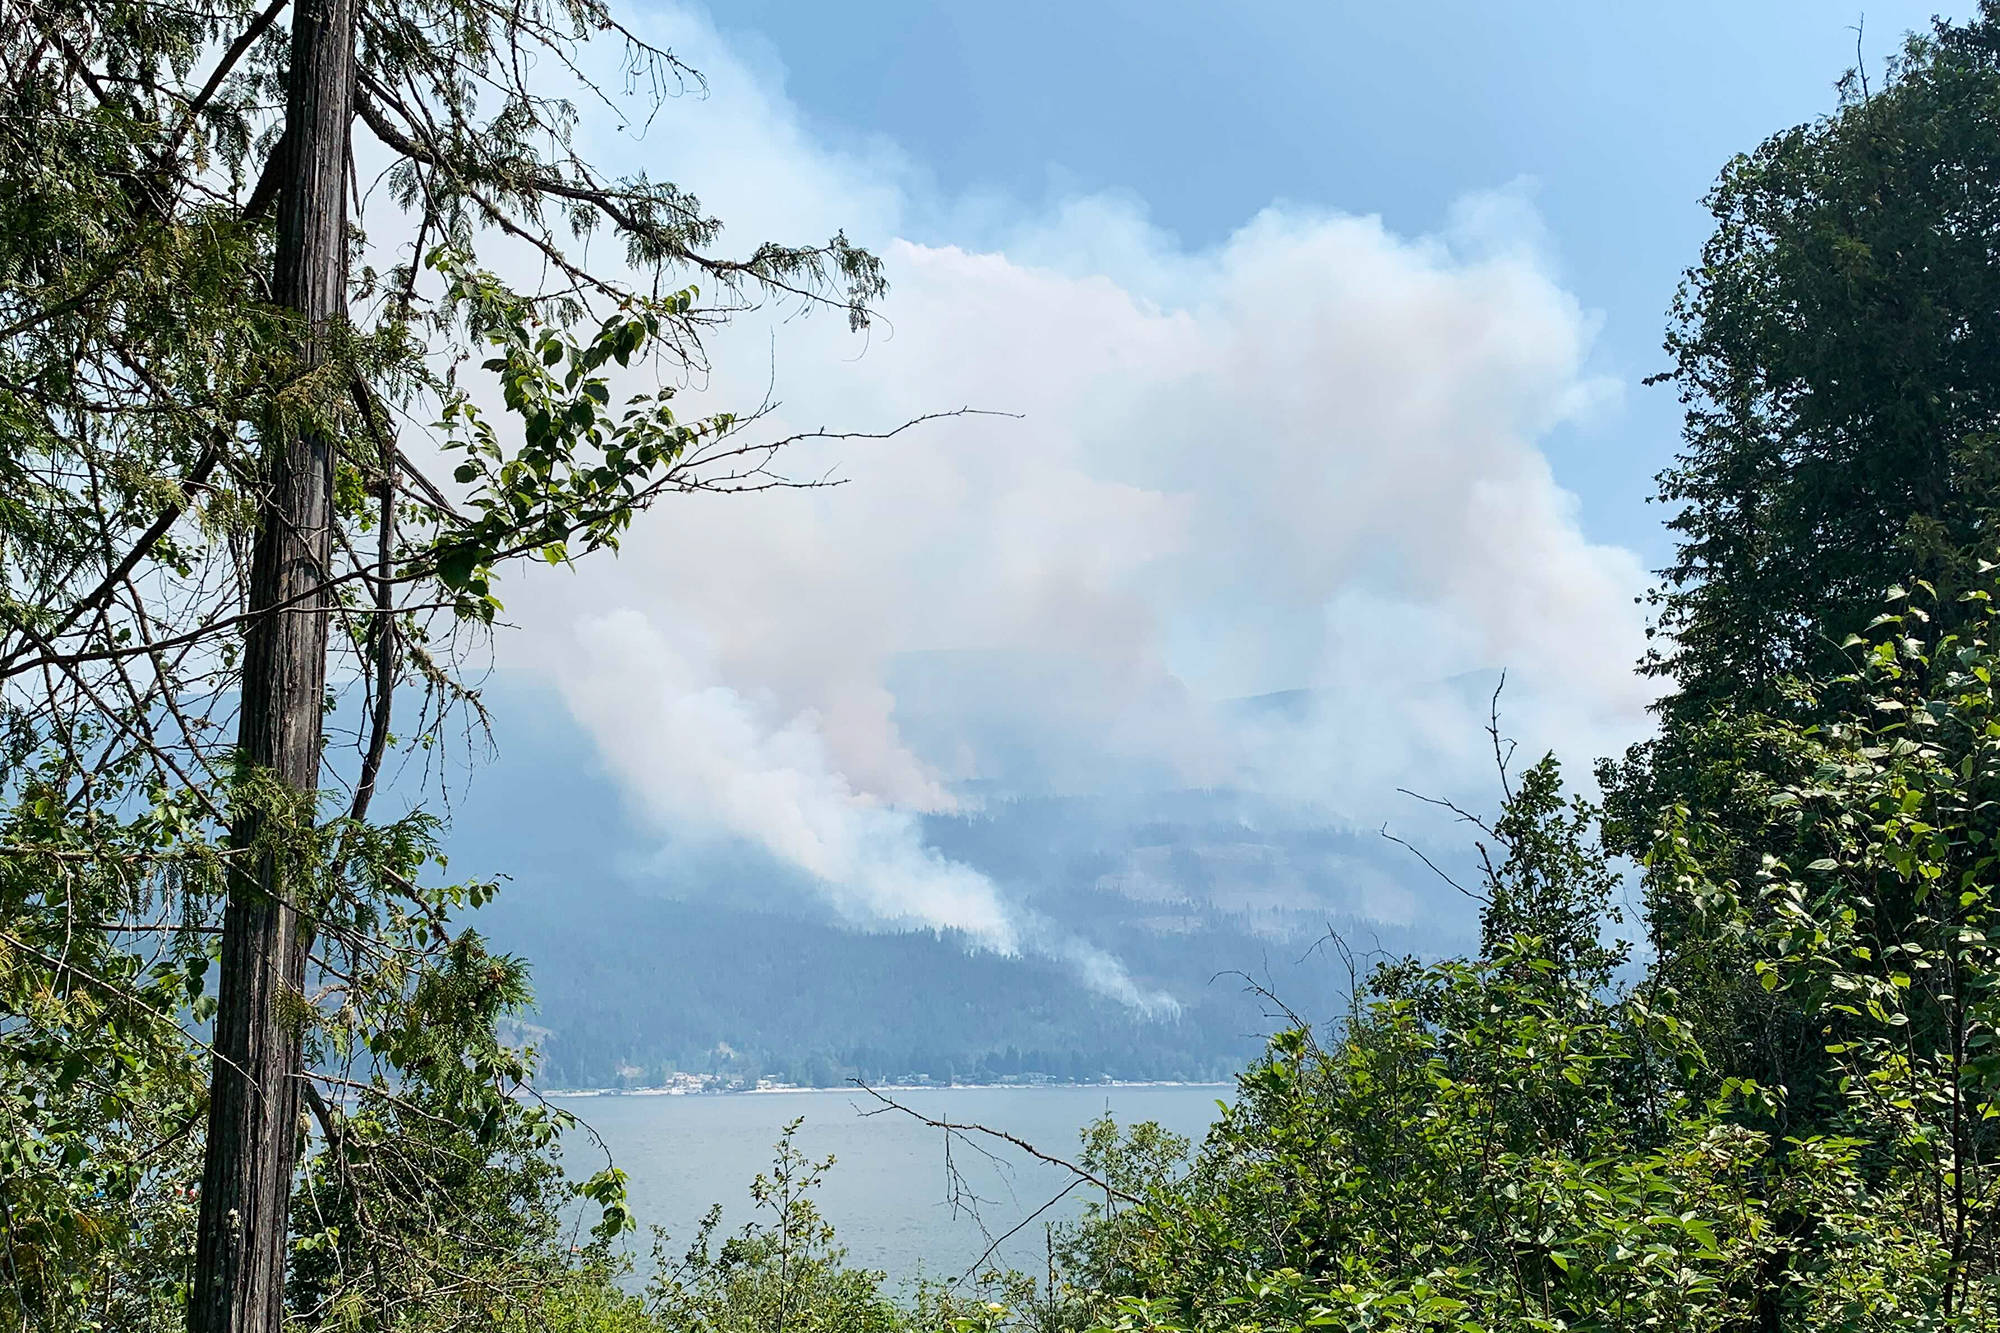 The BC Wildfire Service reported the Two Mile Road interface fire near Sicamous was at 400 hectares as of 2 p.m. on Wednesday, July 21, 2021. (Zachary Roman-Salmon Arm Observer)